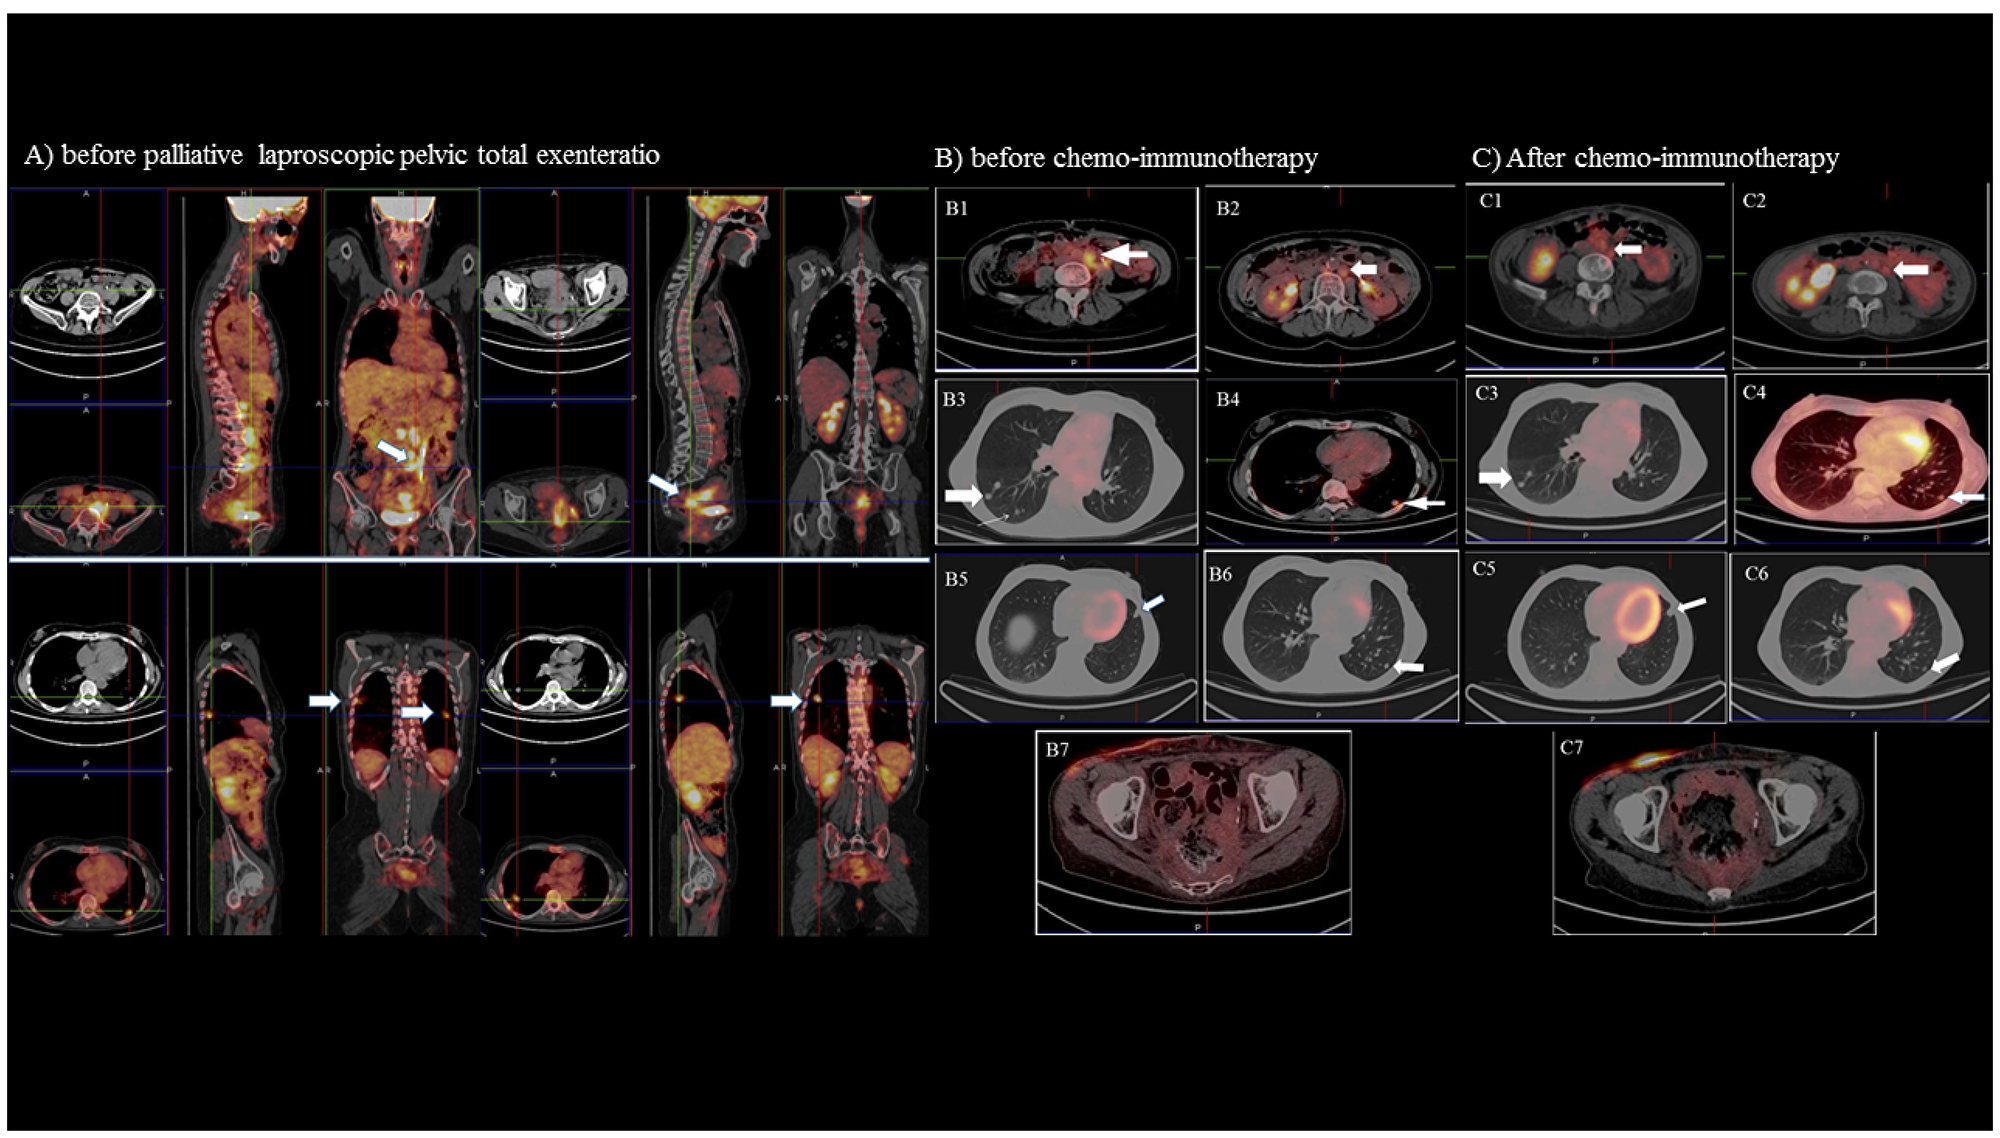 Positron emission tomography (PET) and computed tomography (CT) imaging.